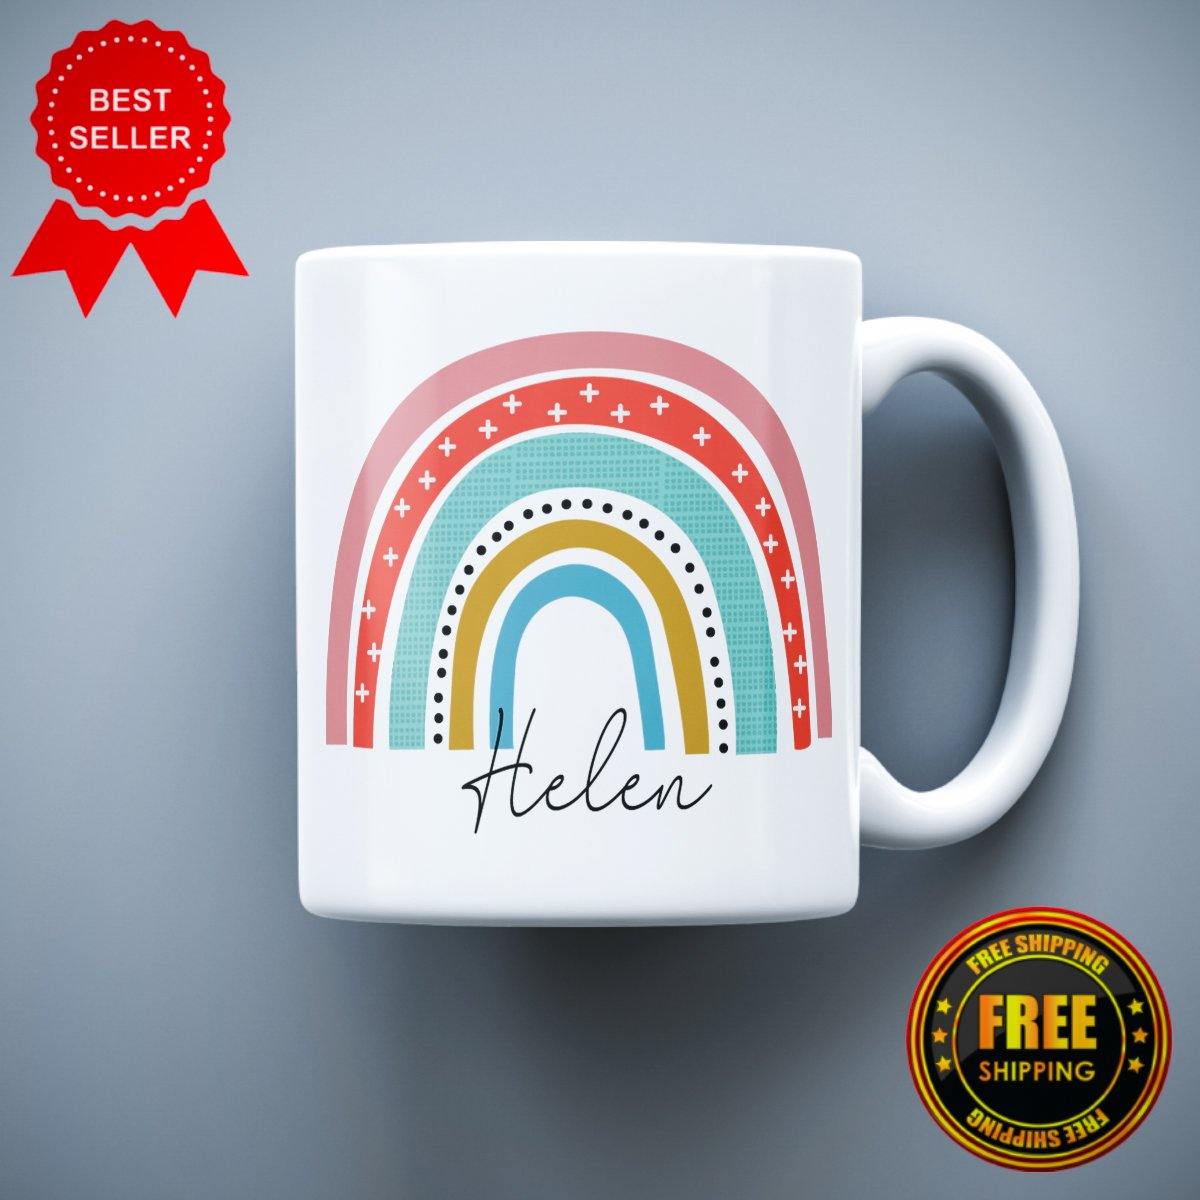 Personalized You Are Nothing Short Of Amazing Printed Ceramic Mug - ApparelinClick